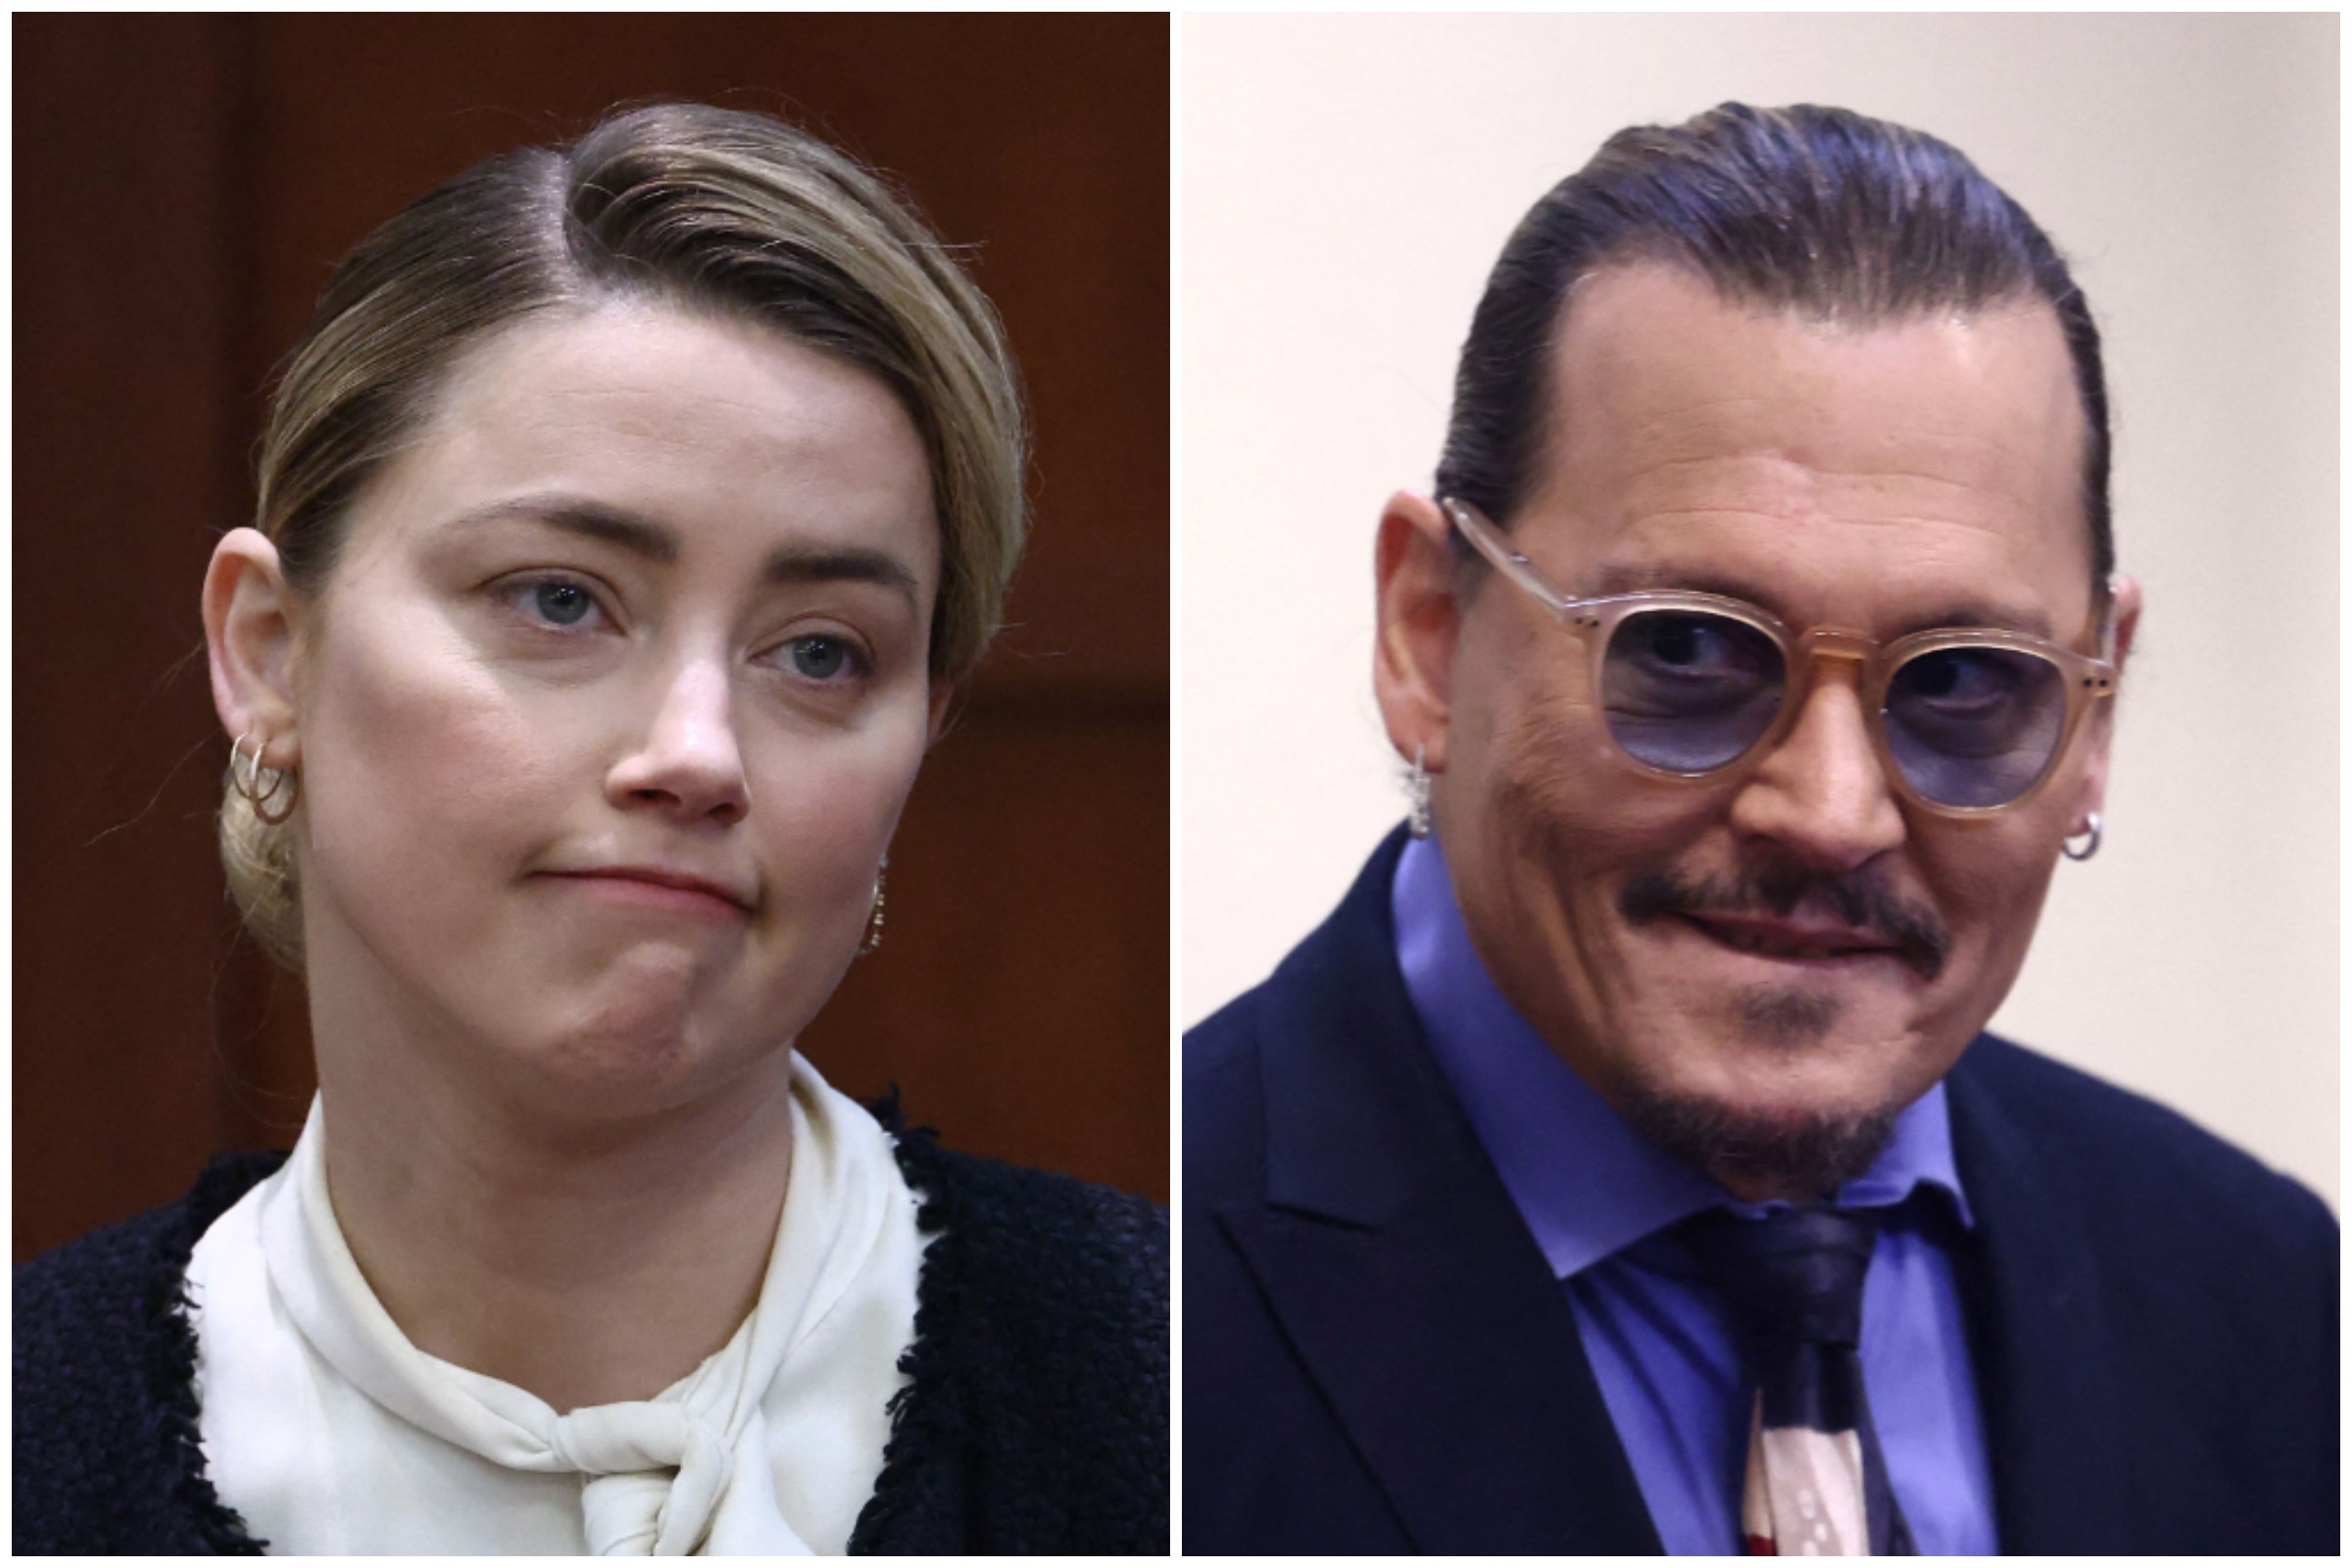 How Amber Heard Stands to Benefit From Johnny Depp Trial Break